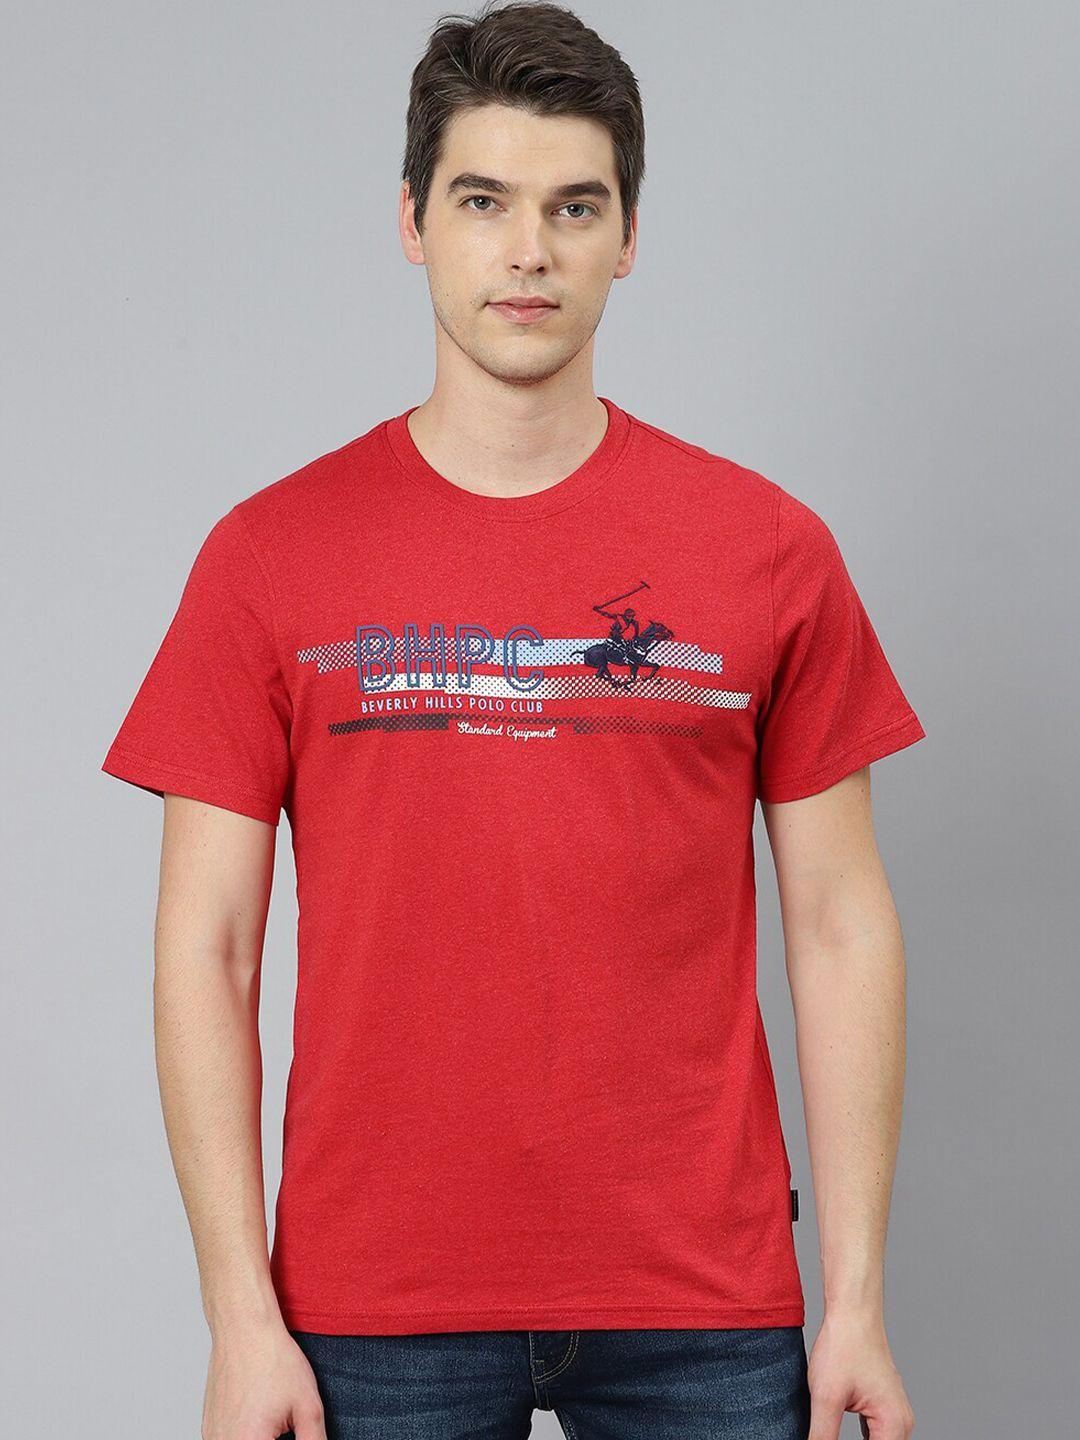 beverly hills polo club men red typography printed cotton t-shirt